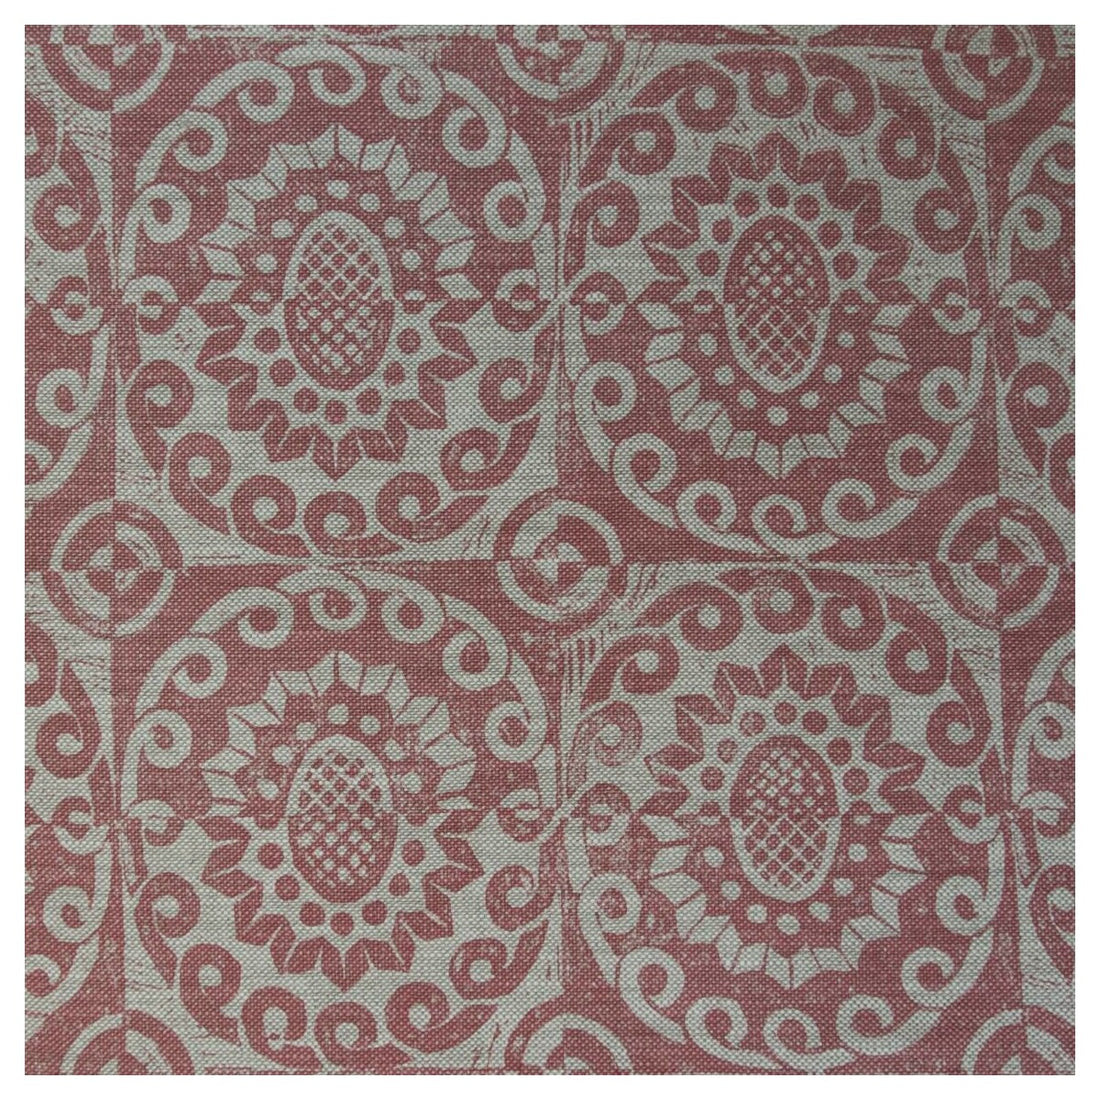 Pineapple On Oatmeal fabric in pink color - pattern BFC-3628.7.0 - by Lee Jofa in the Blithfield collection